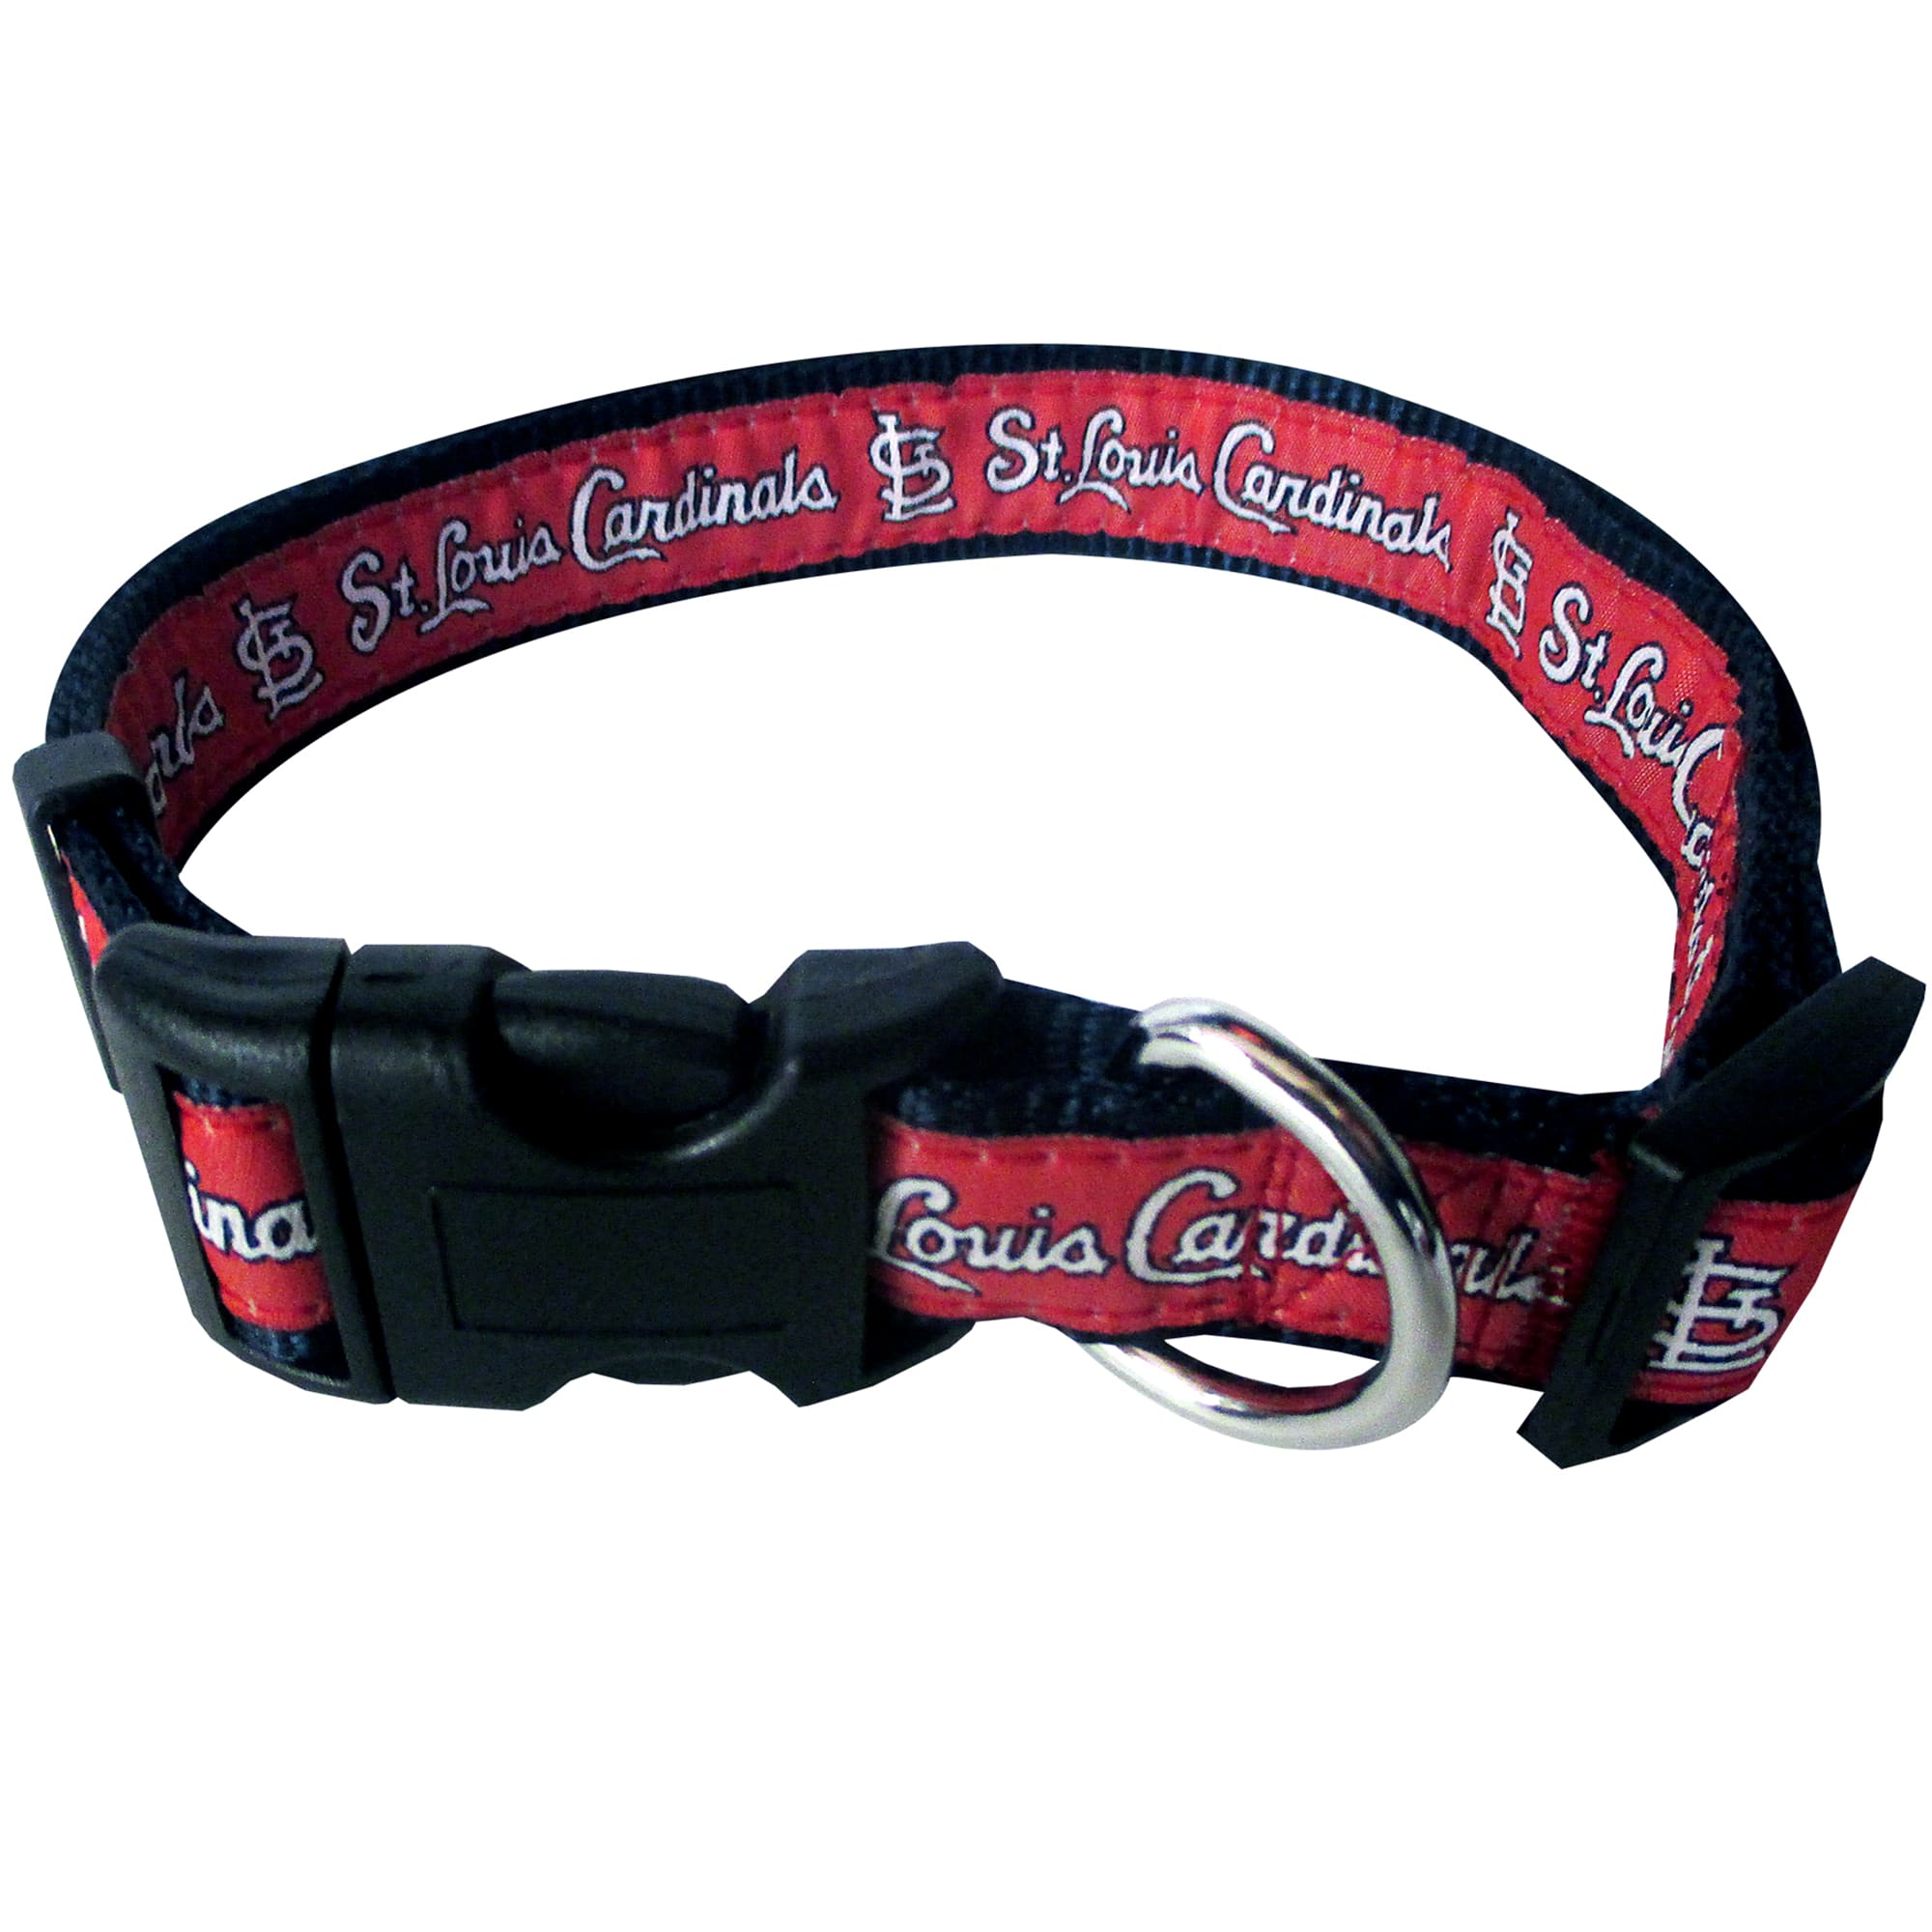 Pets First St. Louis Cardinals Red Dog Collar, Large at